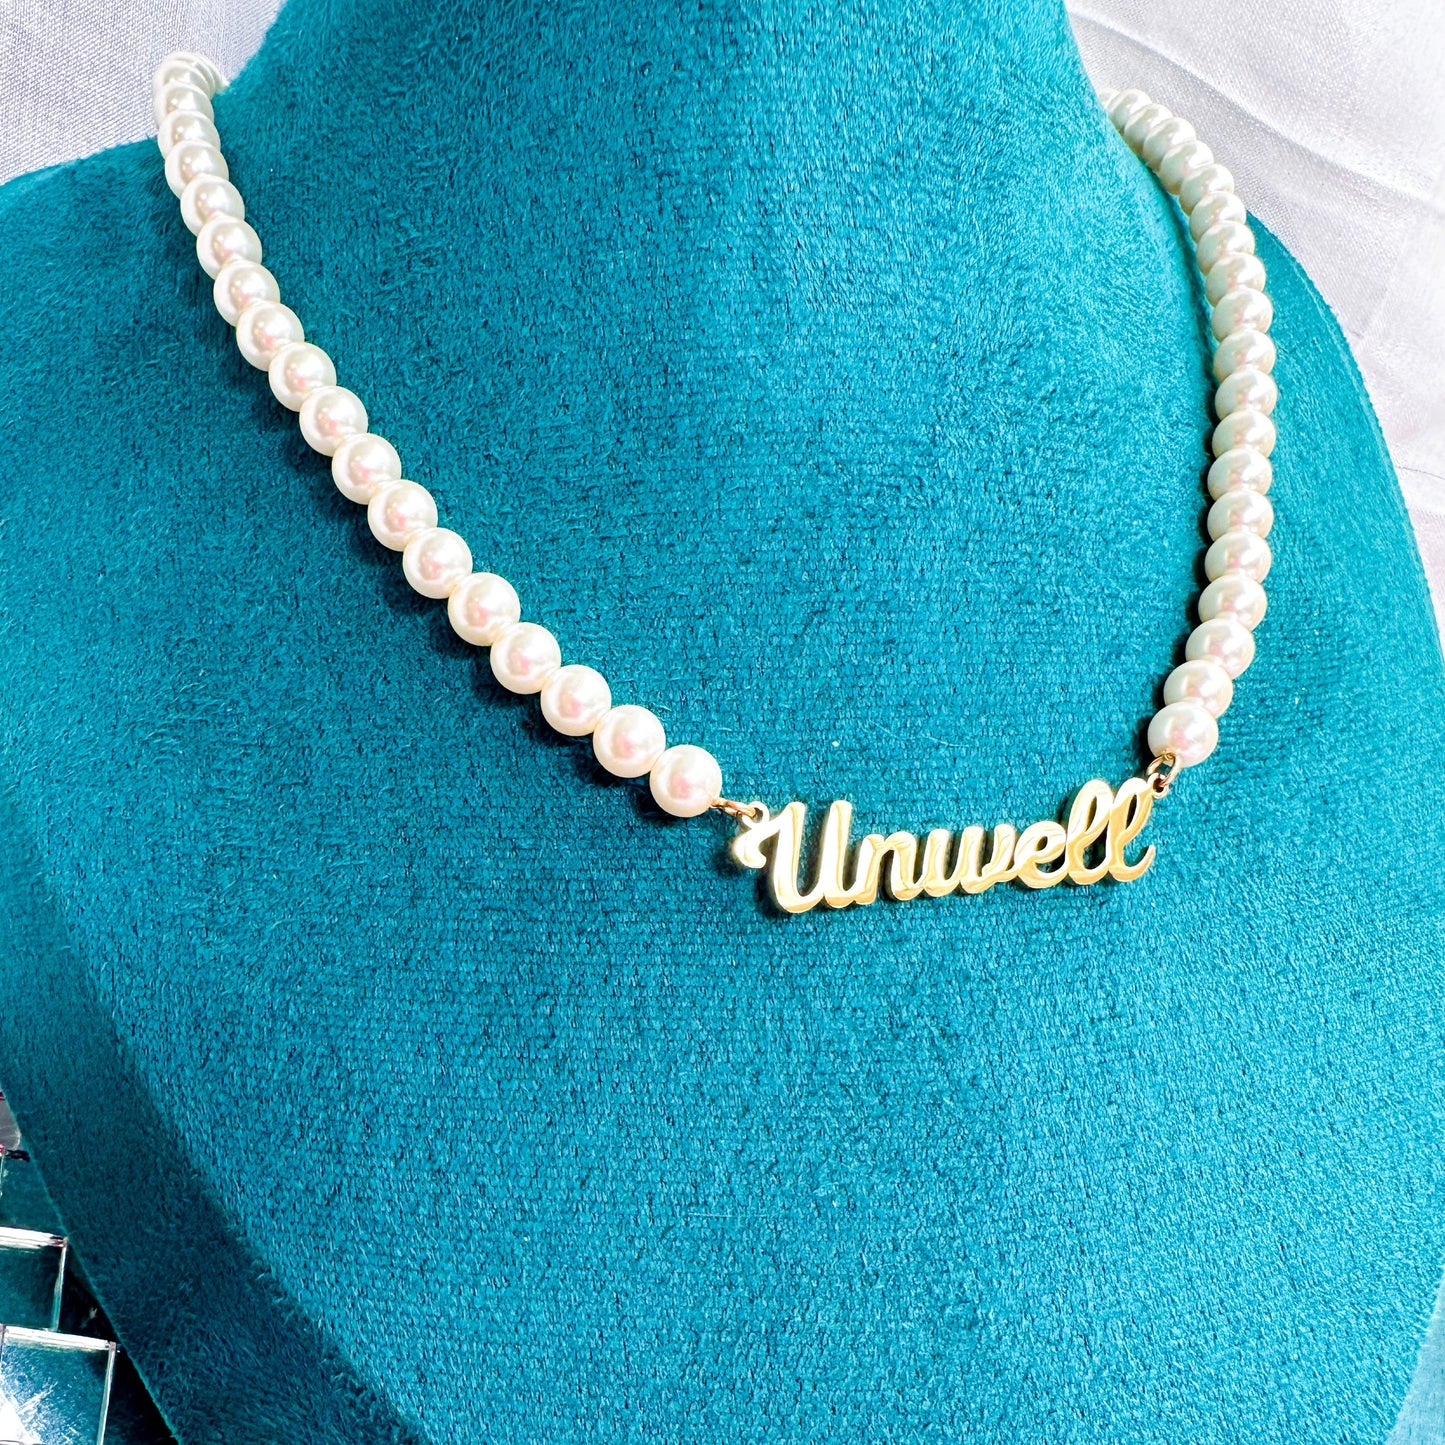 Unwell Pearl Necklace - Gold